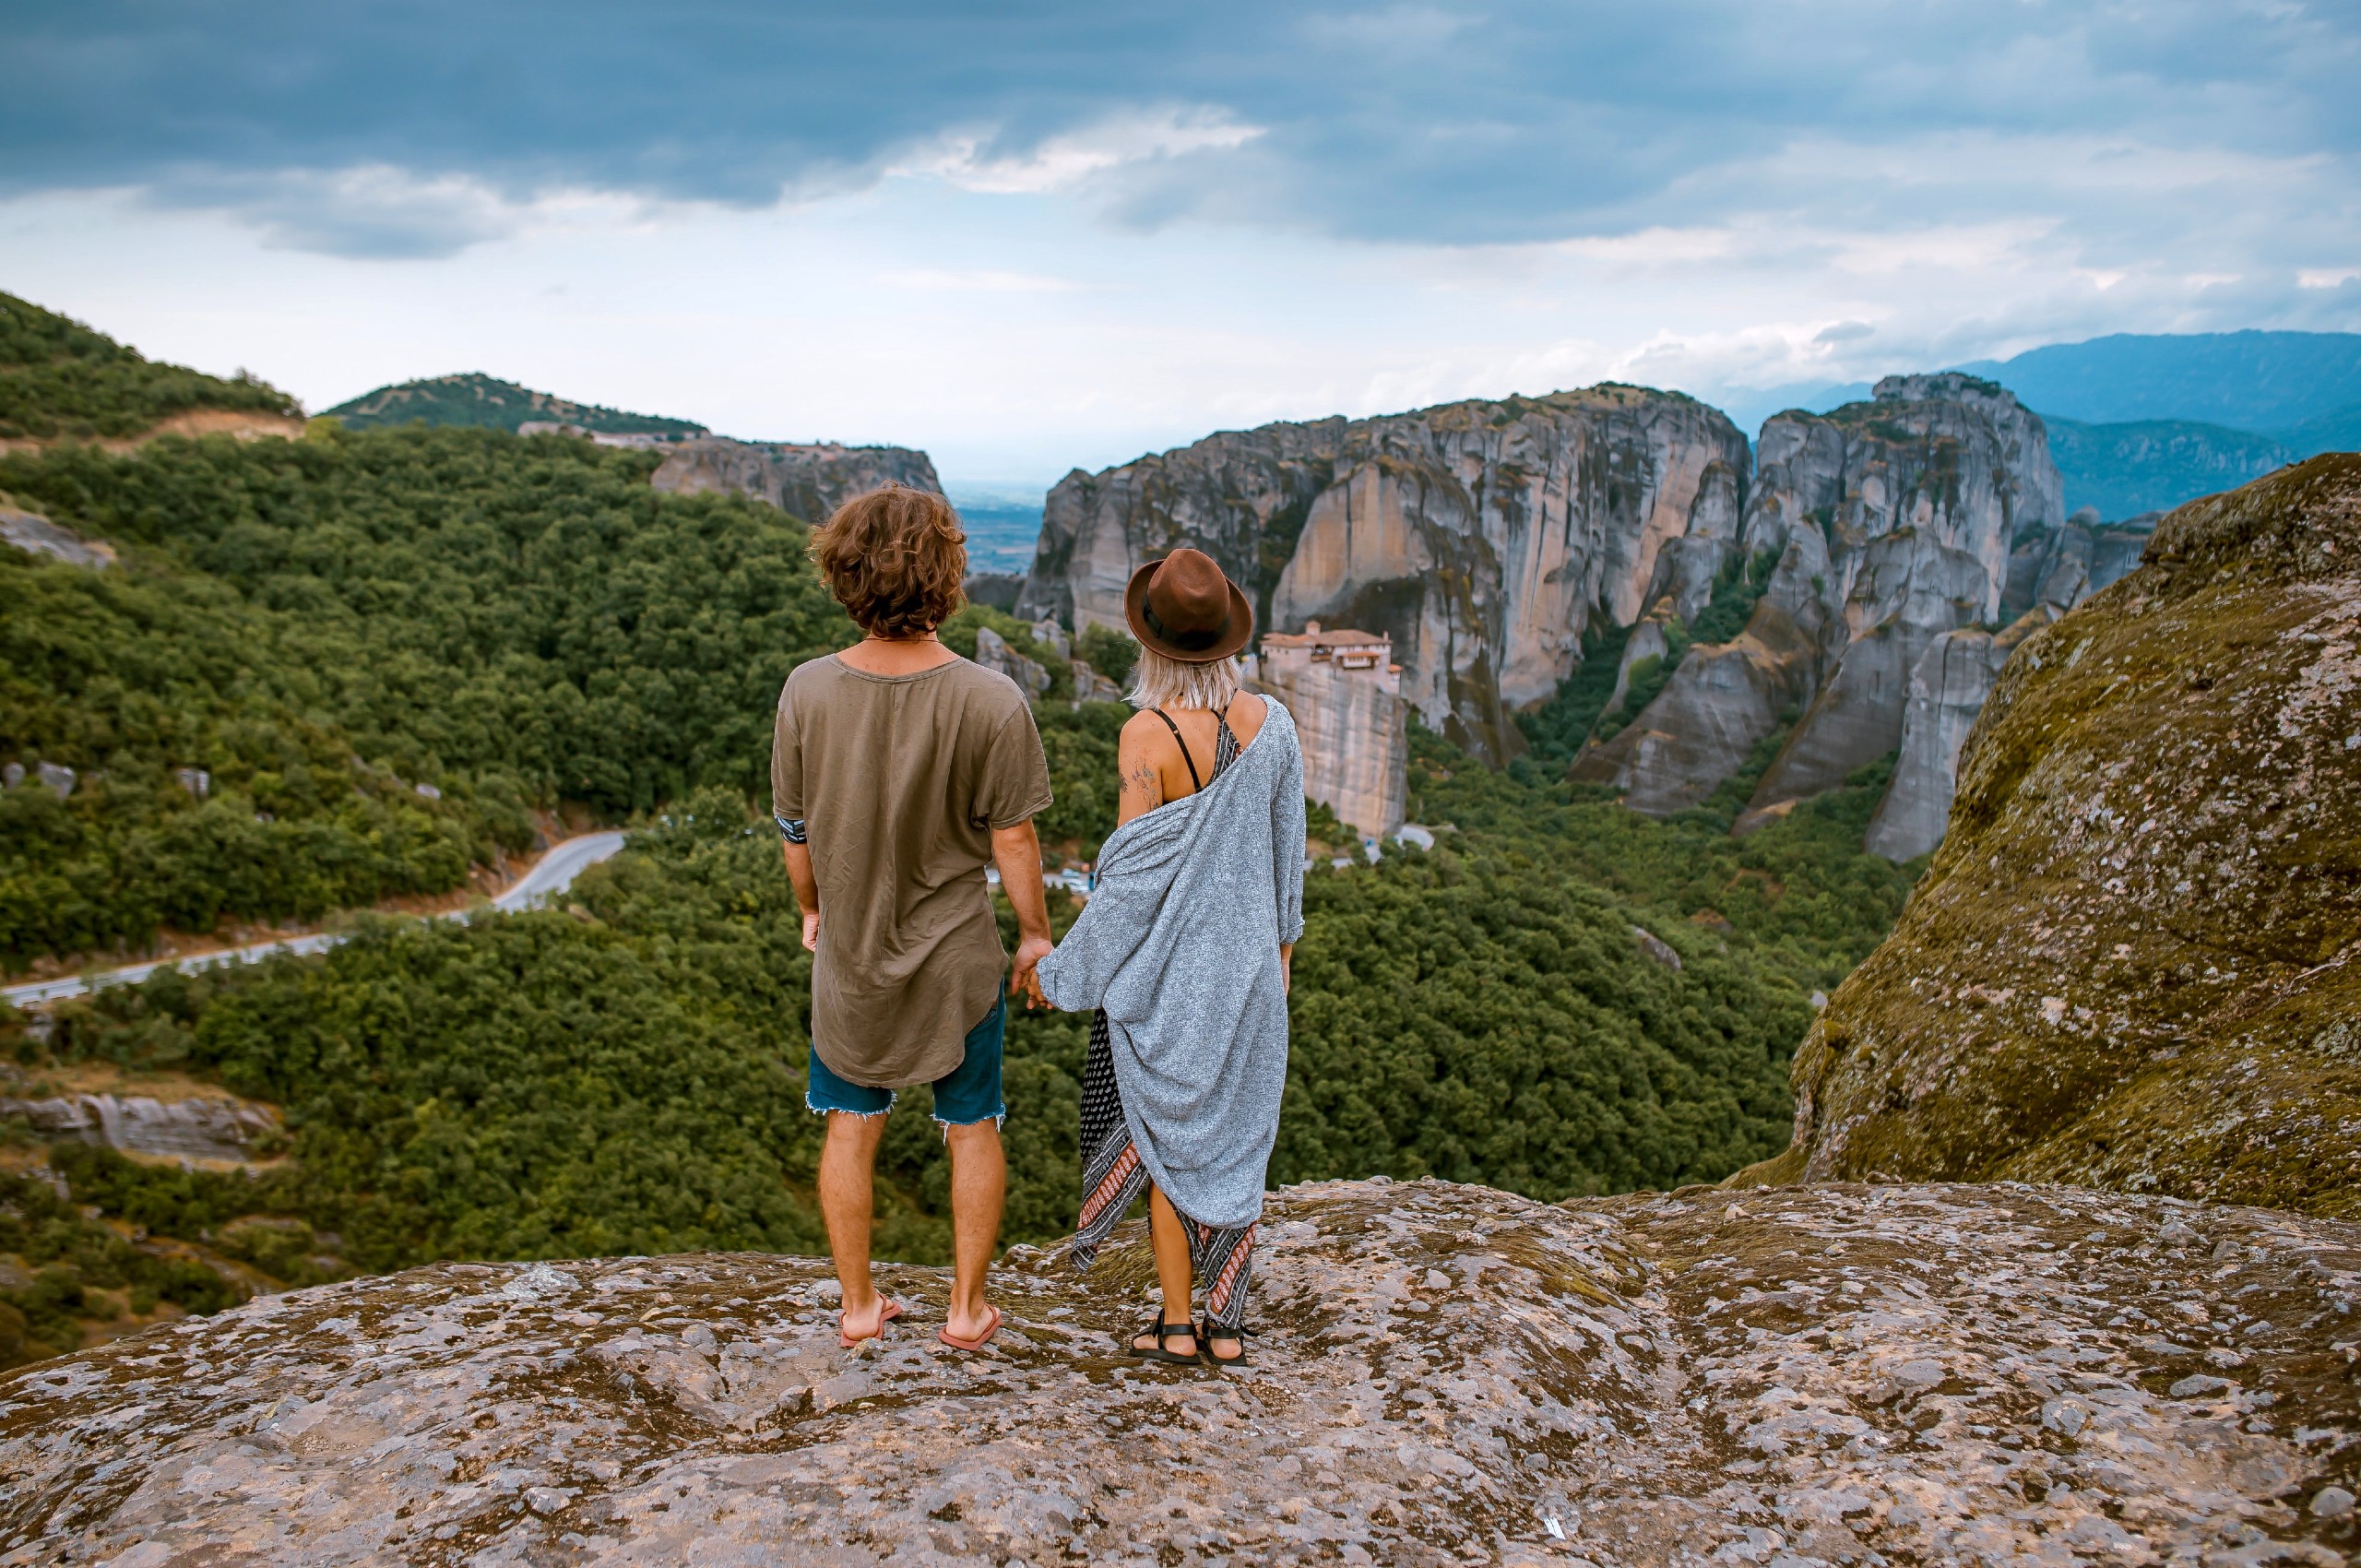 Couple enjoying the beautiful views of the rock formations in Meteora, Greece